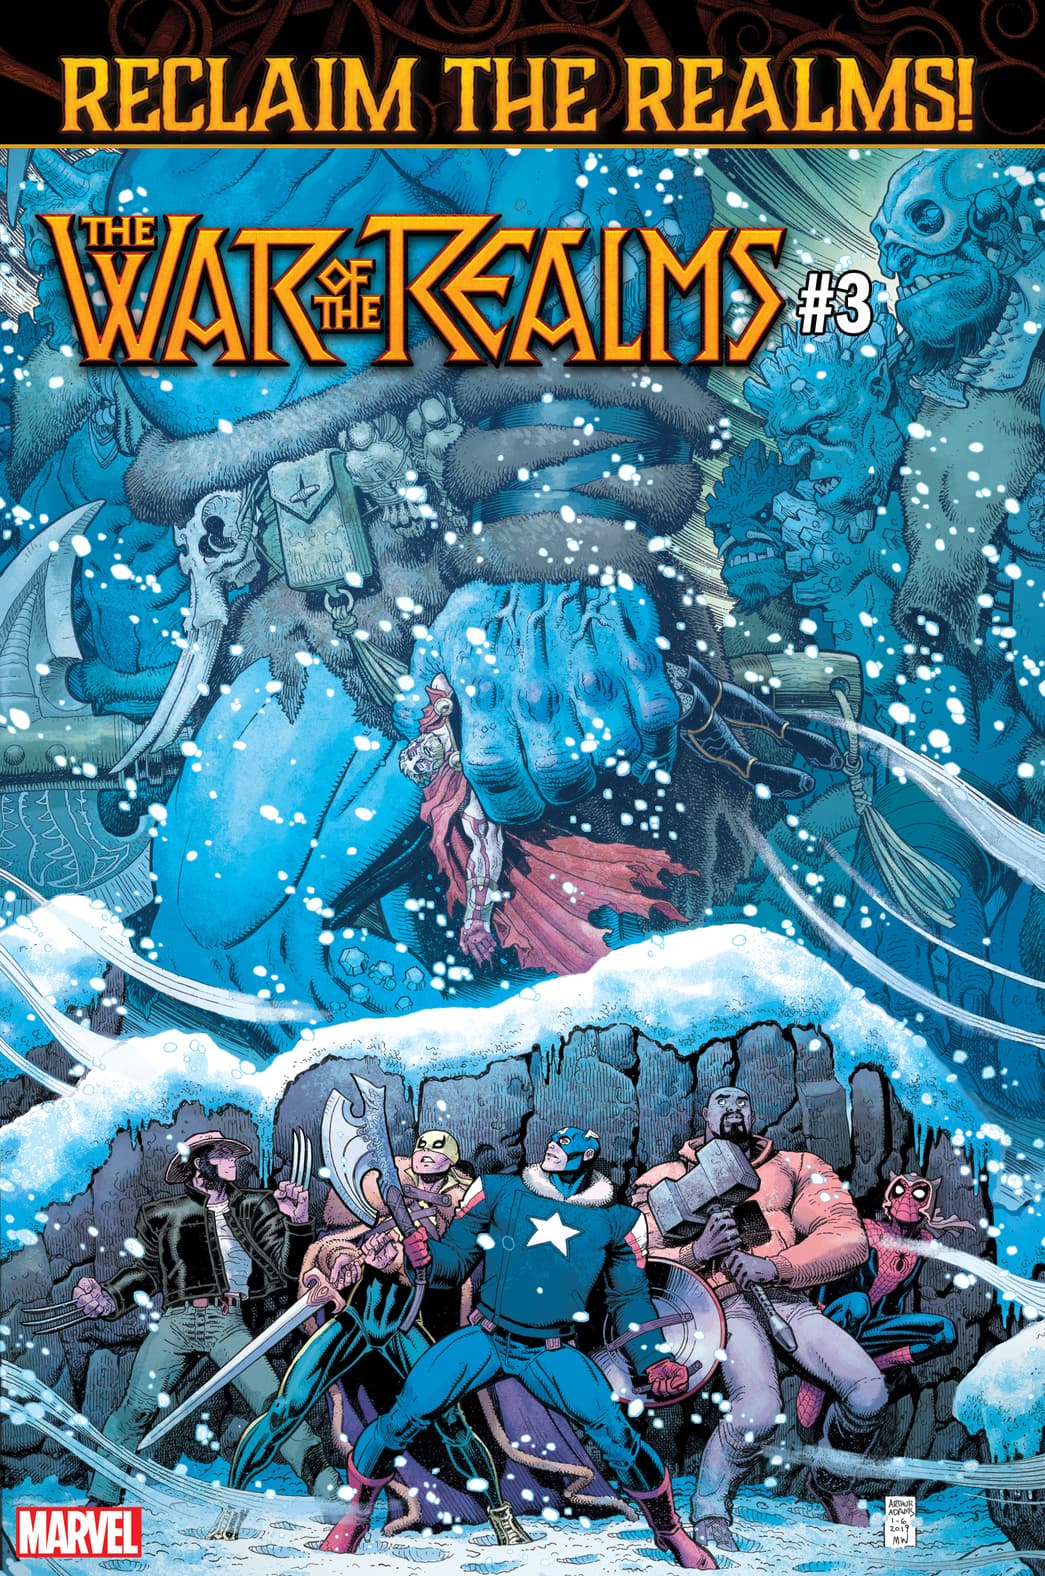 WAR OF THE REALMS #3